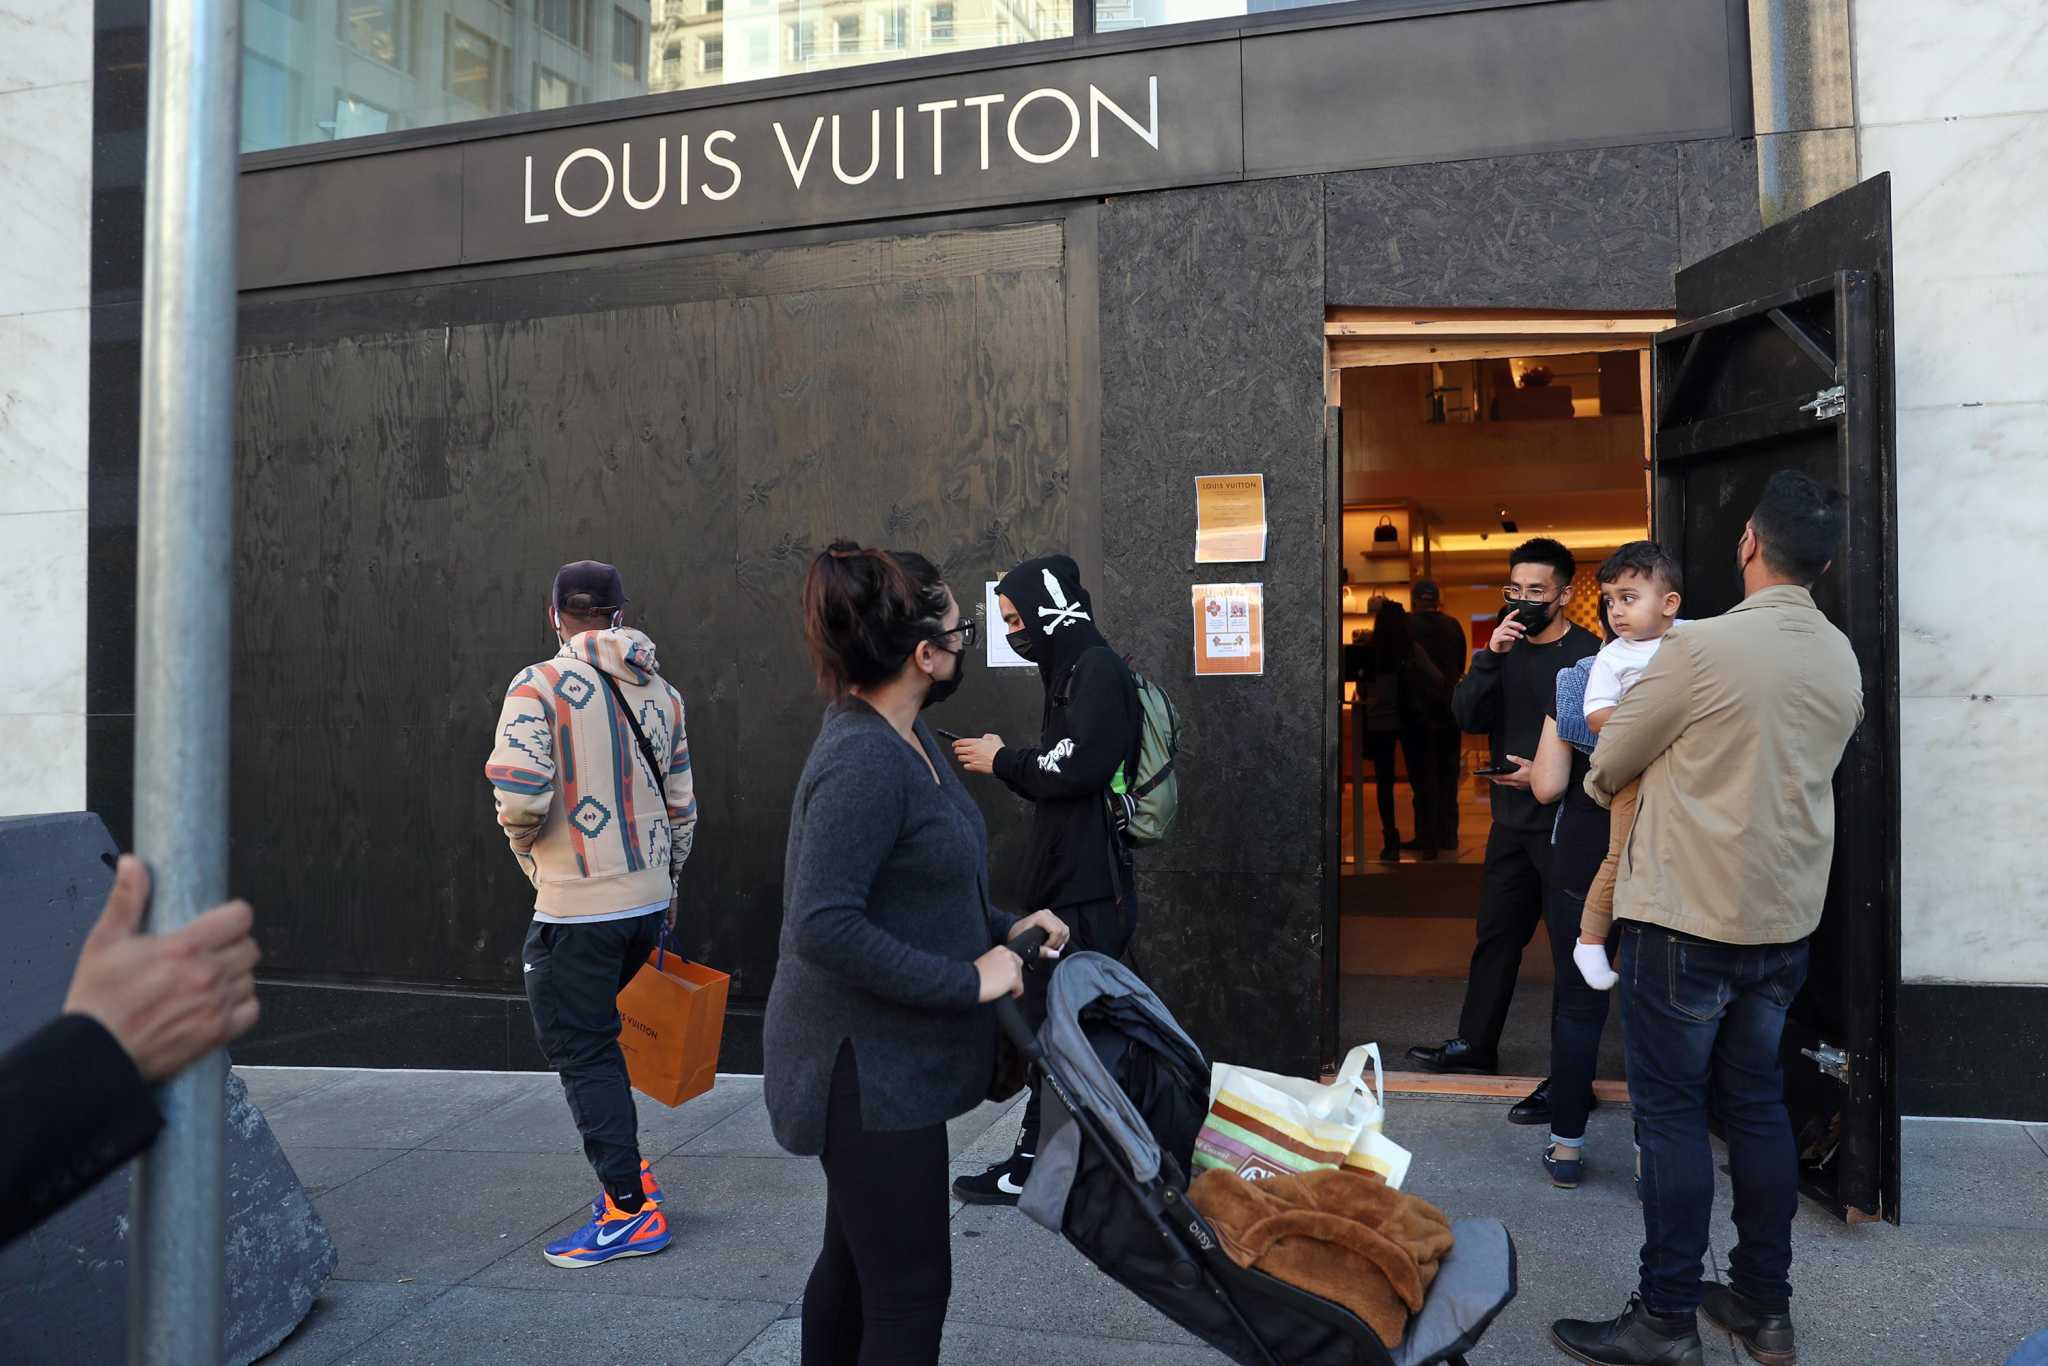 Louis Vuitton in SF's Union Square Gets Cleared Out In New Robbery